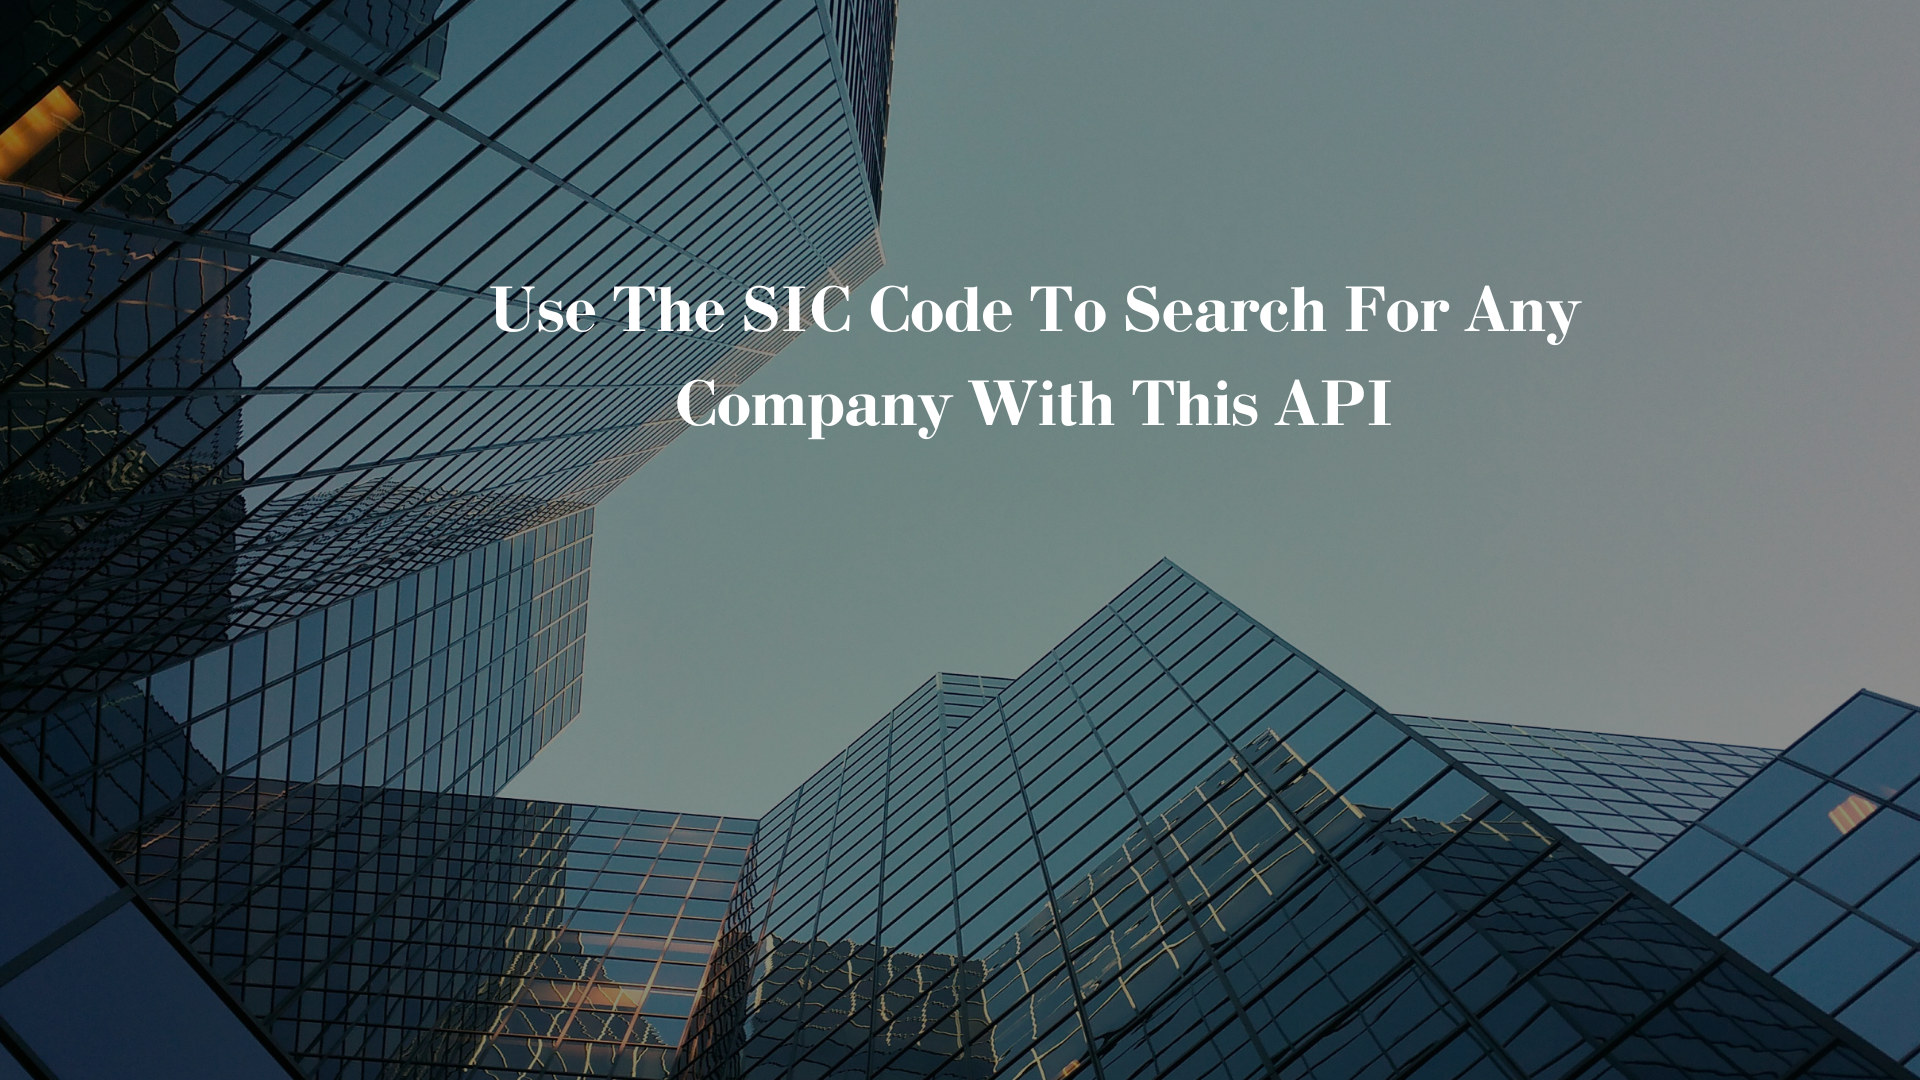 Use The SIC Code To Search For Any Company With This API